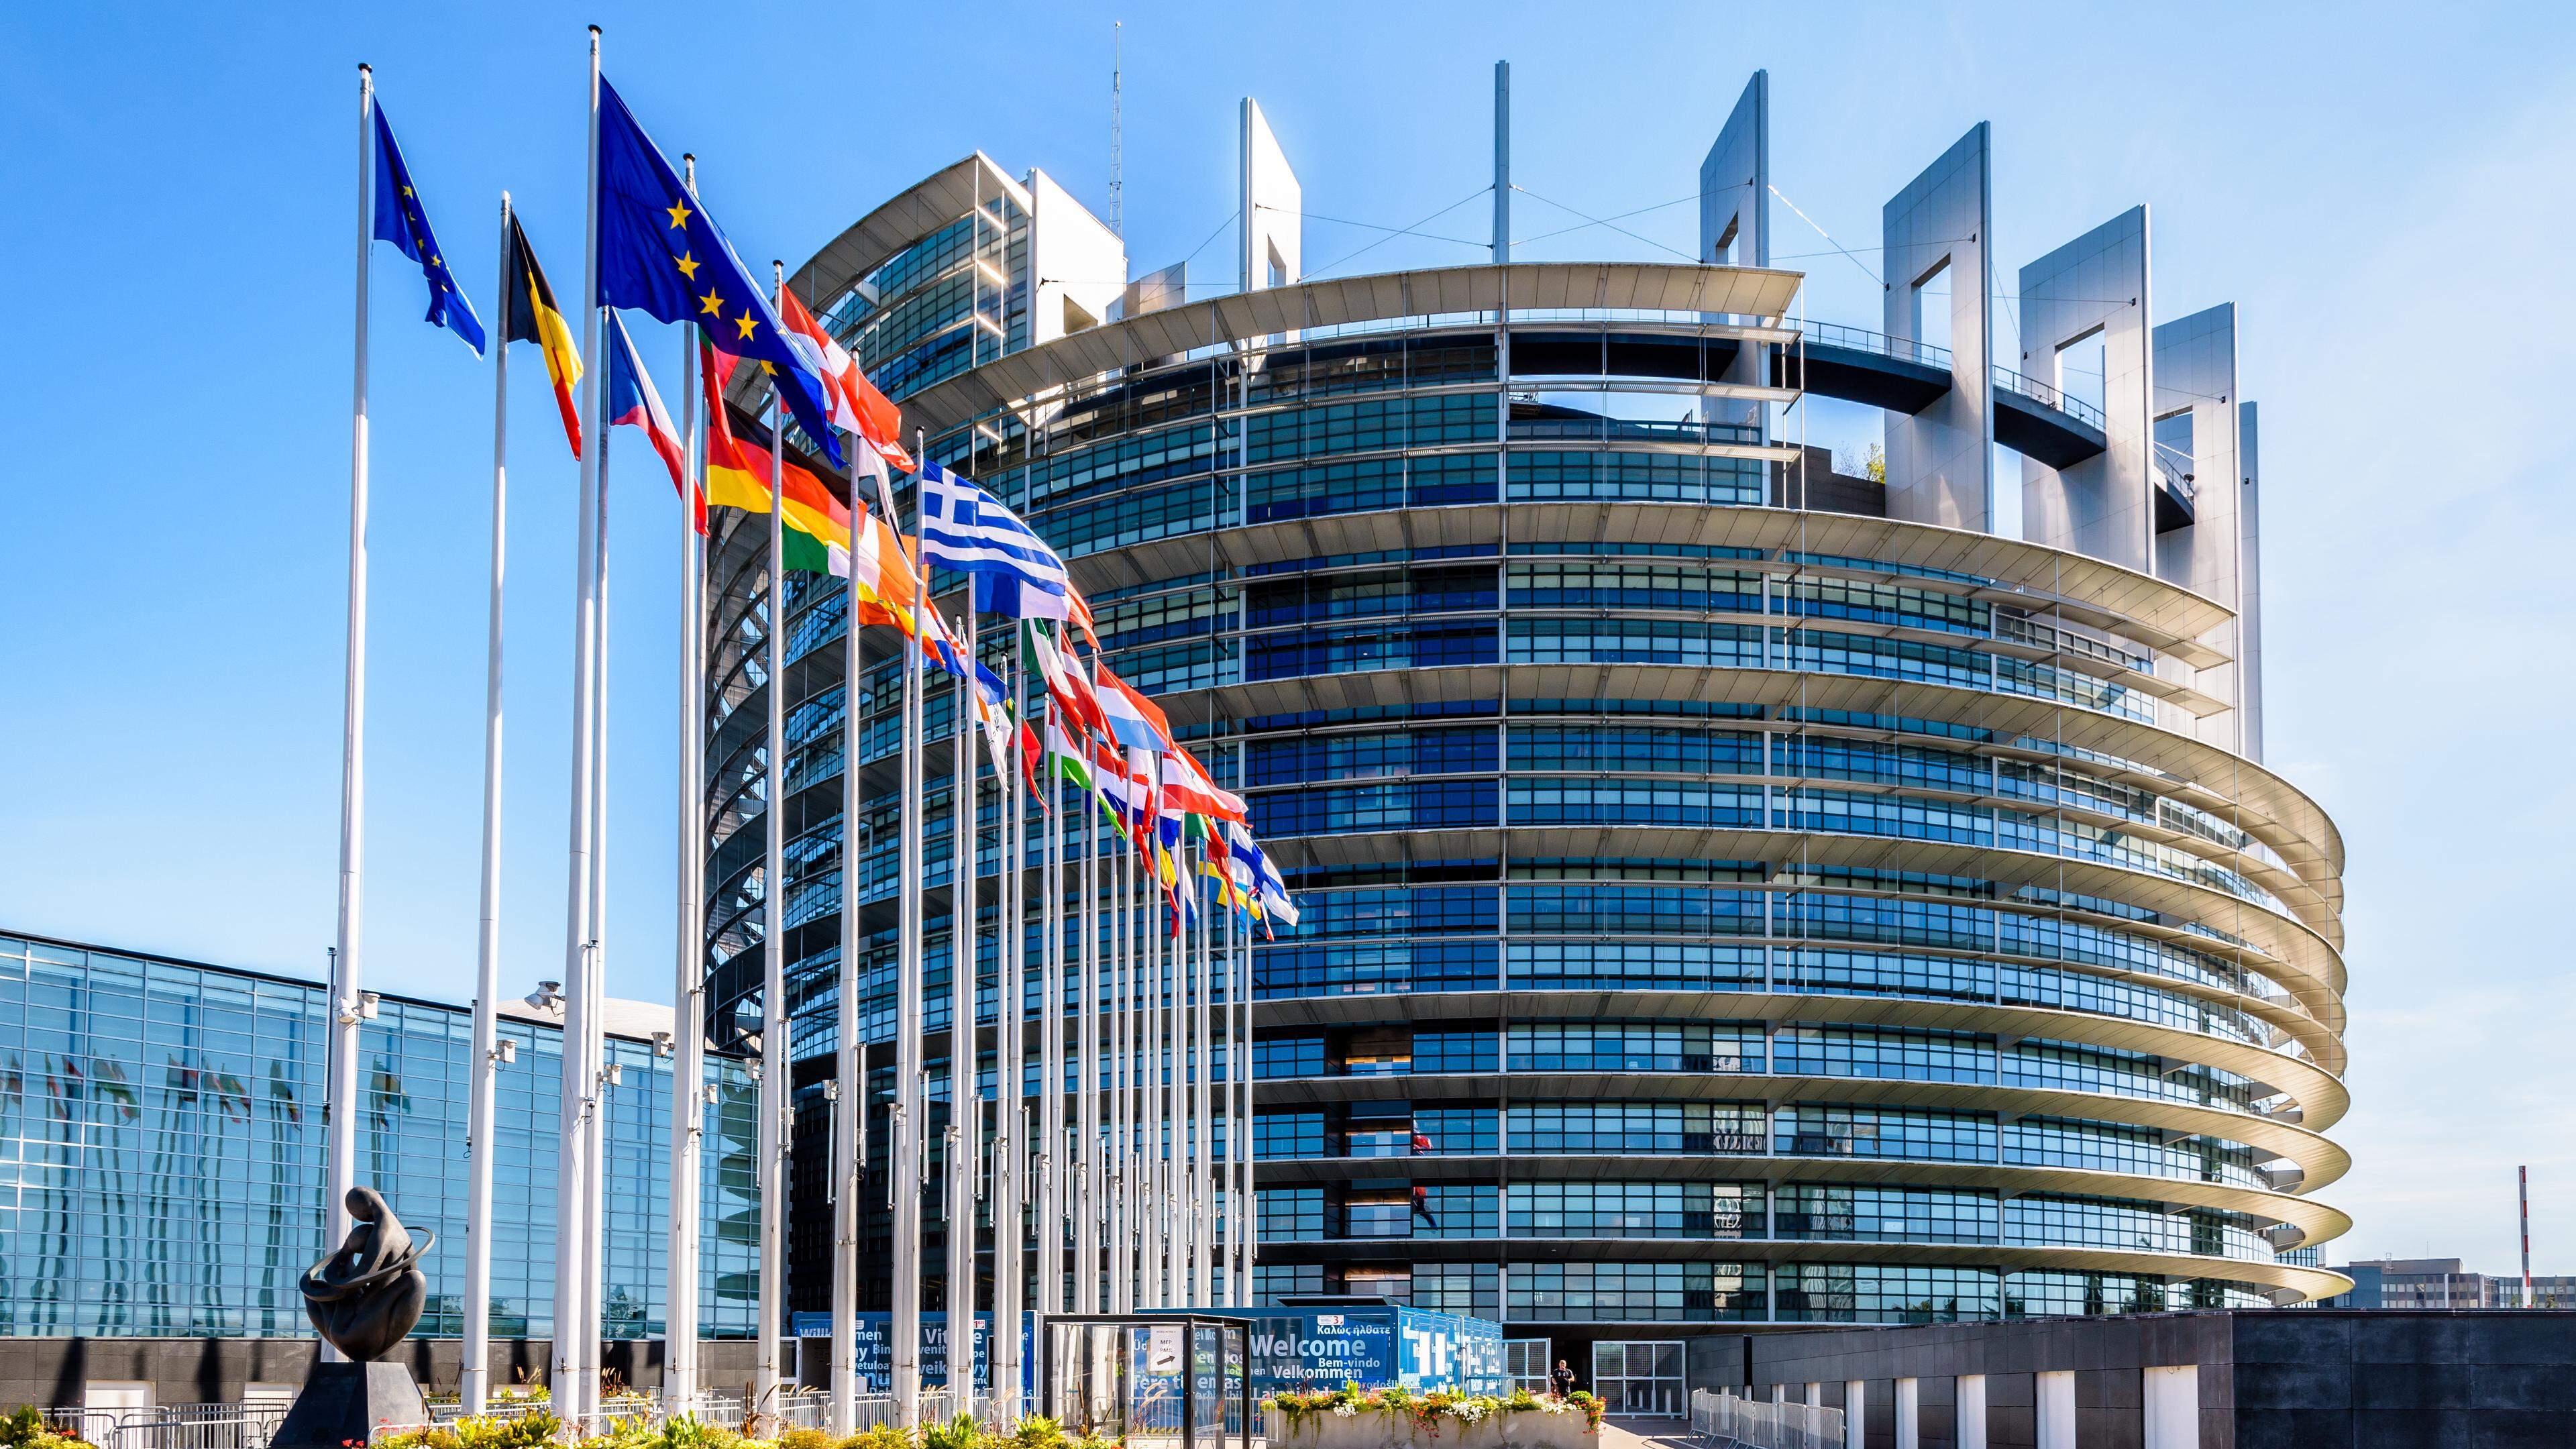 Just over 30,000 EU citizens who are not Luxembourgers will vote on 9 June to send six MEPs from the Grand Duchy to the European Parliament, whose plenary sessions are held in Strasbourg’s Louise Weiss building